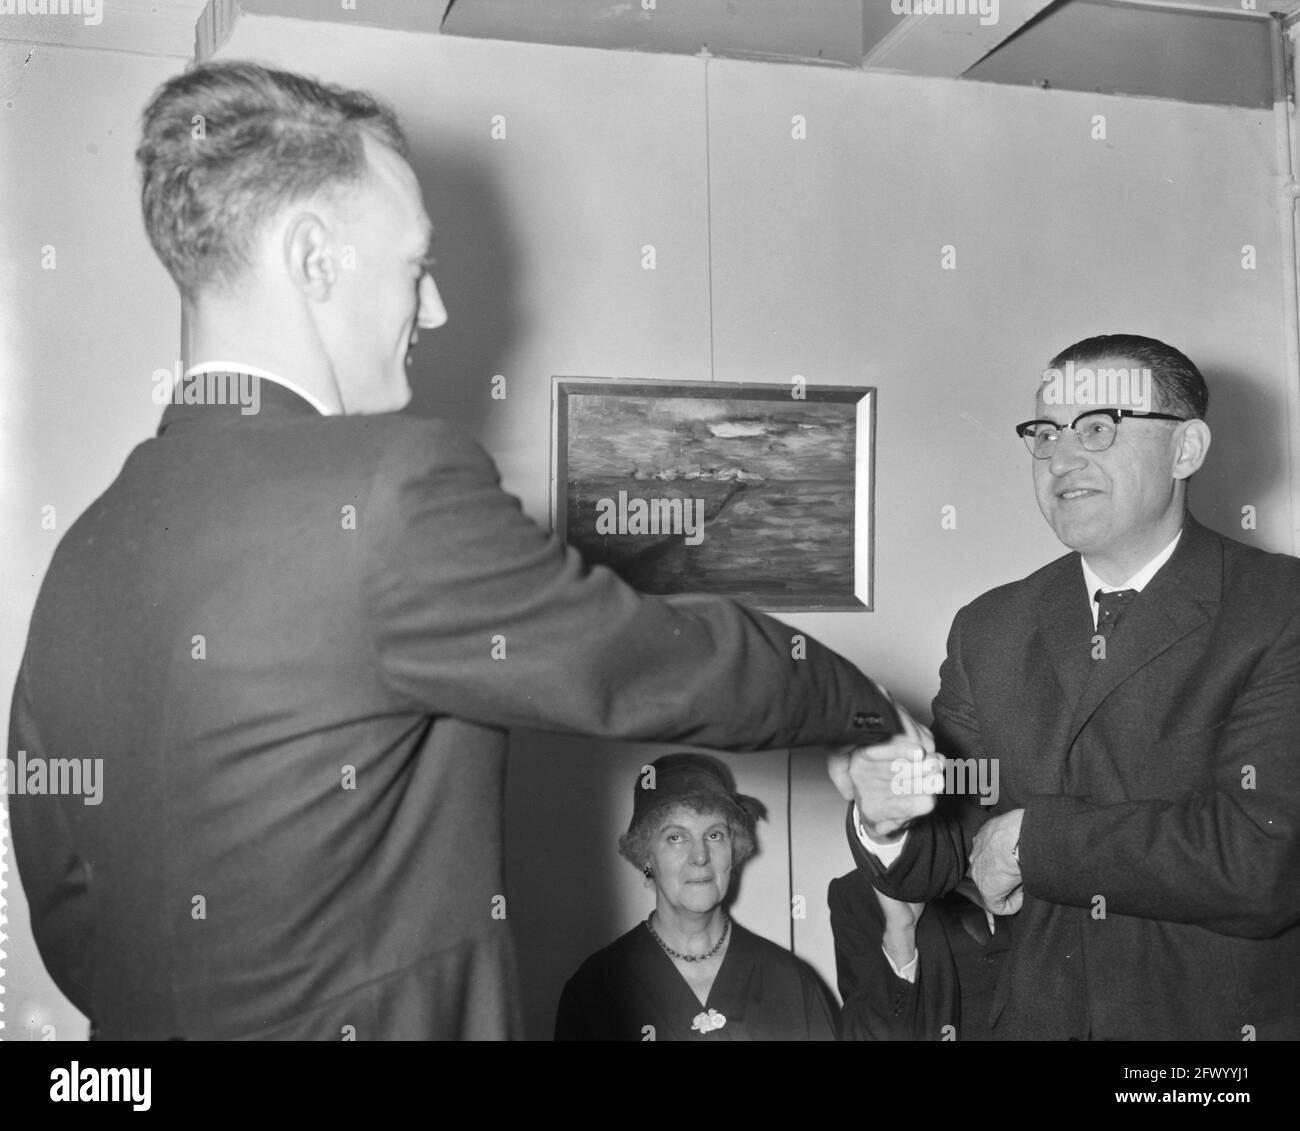 Transfer of the restored building to OSIRIS, December 6, 1960, Transfers, buildings, The Netherlands, 20th century press agency photo, news to remember, documentary, historic photography 1945-1990, visual stories, human history of the Twentieth Century, capturing moments in time Stock Photo